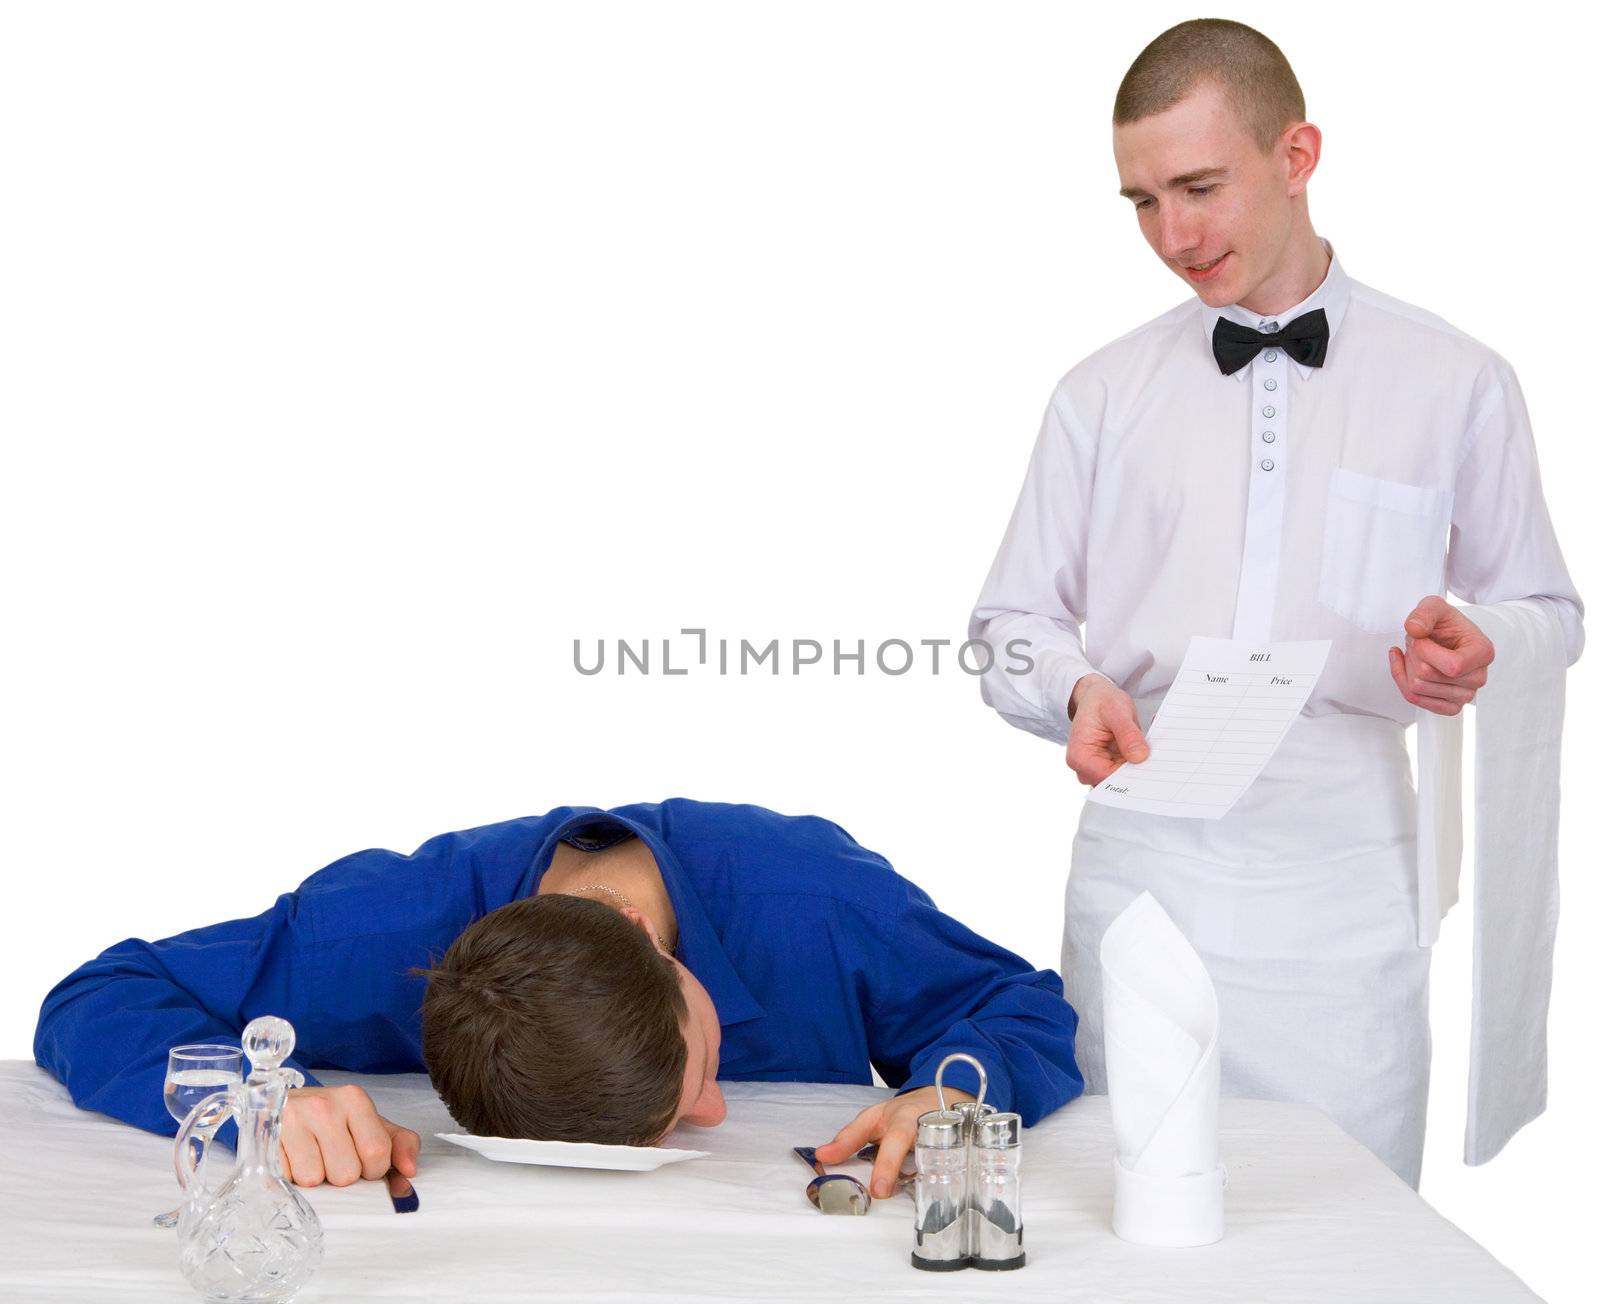 Waiter and guest of restaurant on a white background